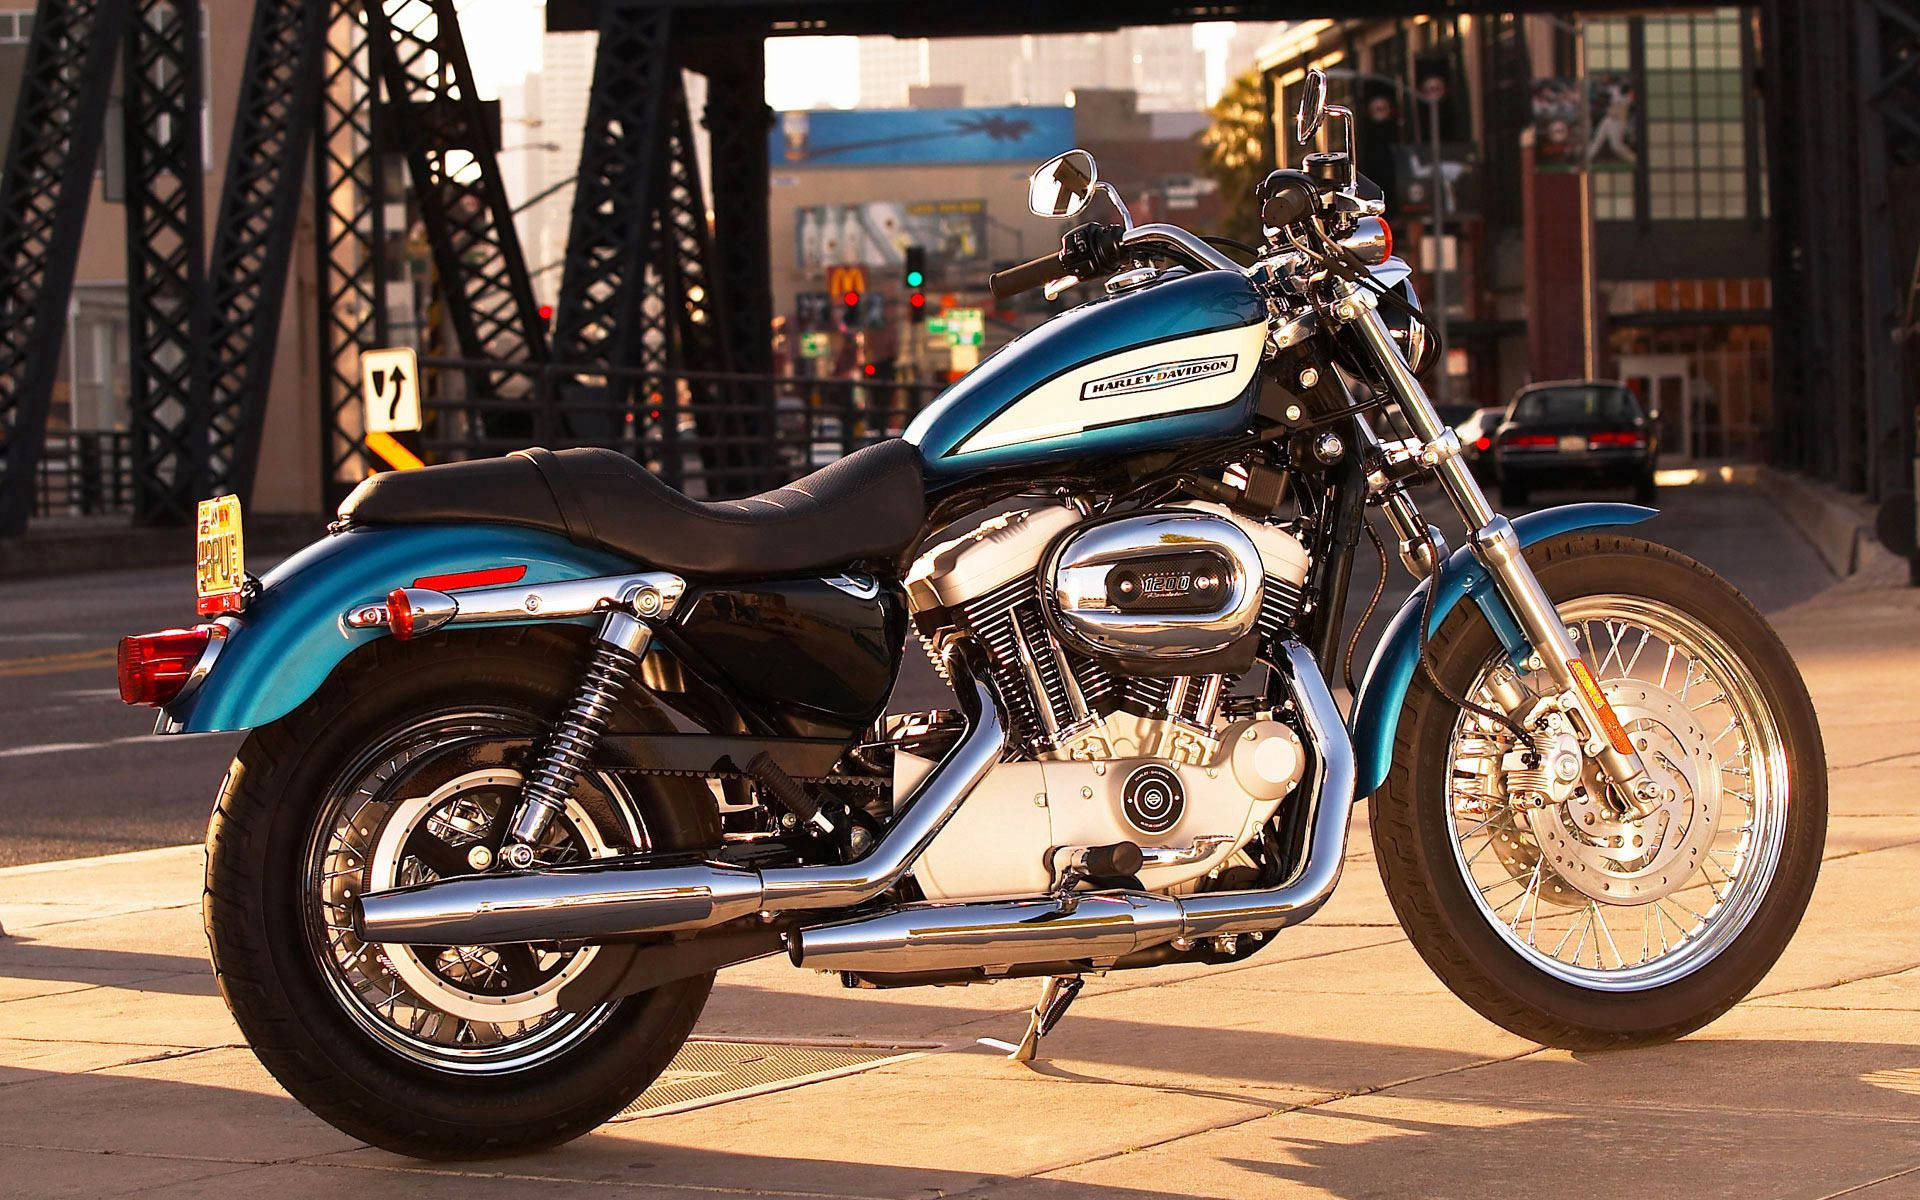 Harley Davidson In The City Background